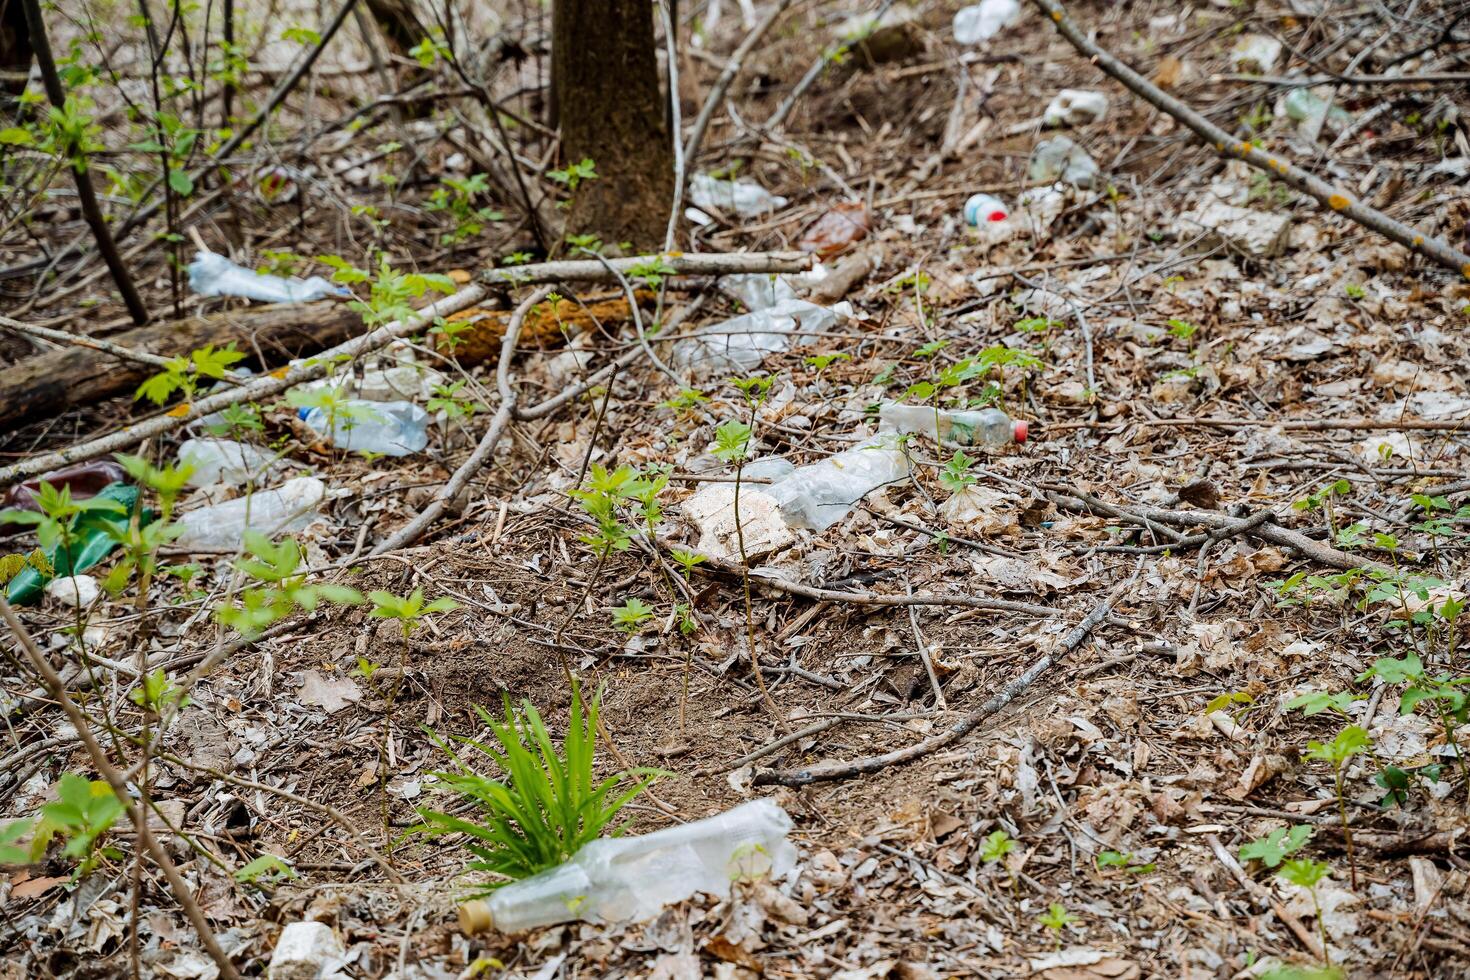 Plastic garbage is lying in the urban forest polluting the environment, human waste on the ground, the death of nature, bottles are lying in the soil. photo